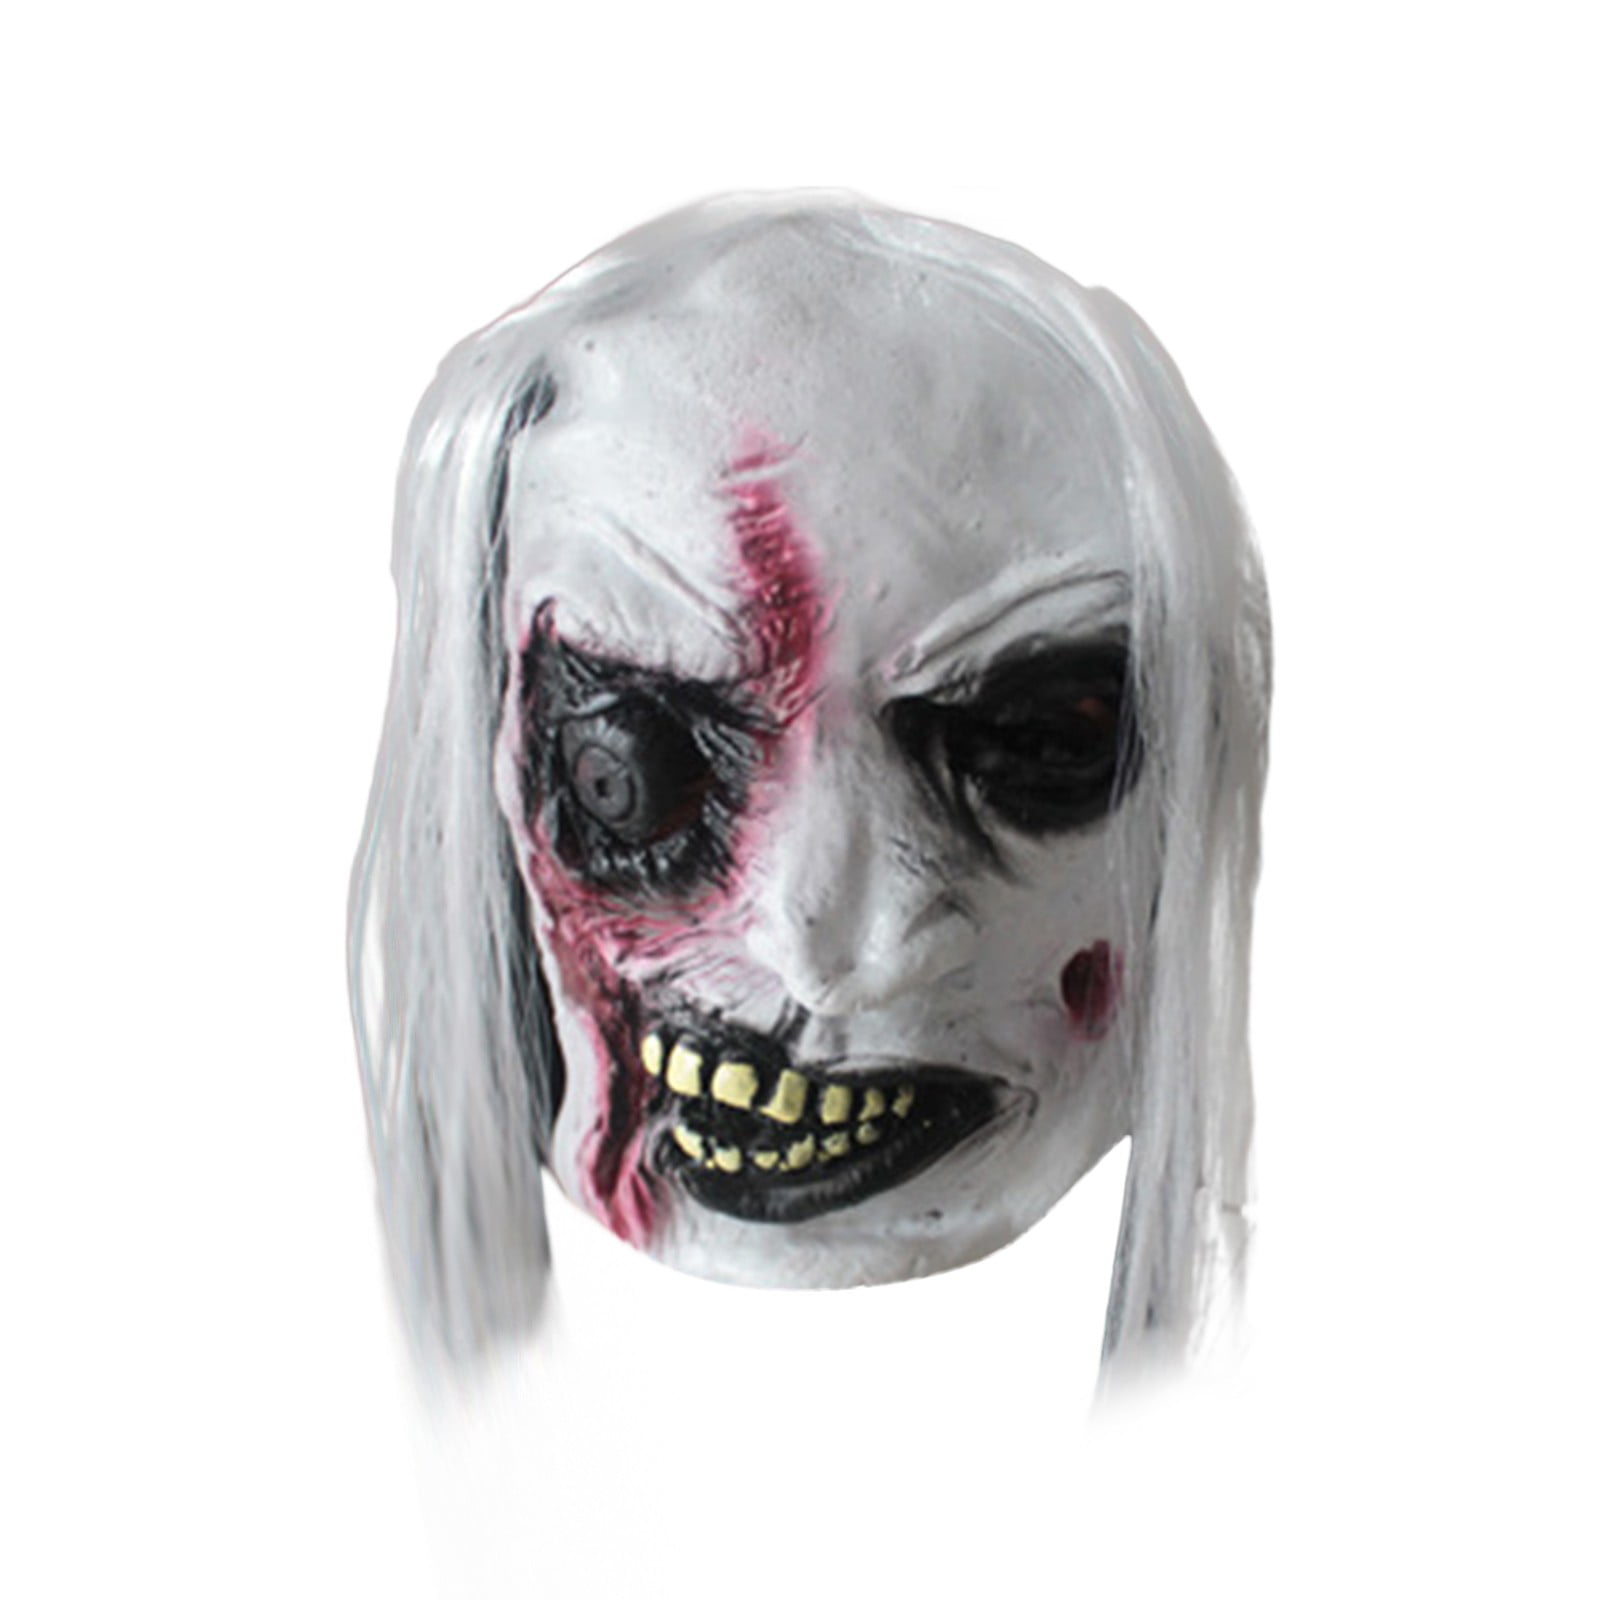 HALLOWEEN ADULT NO FACE CORPSE SKULL HORROR MASK PROP 